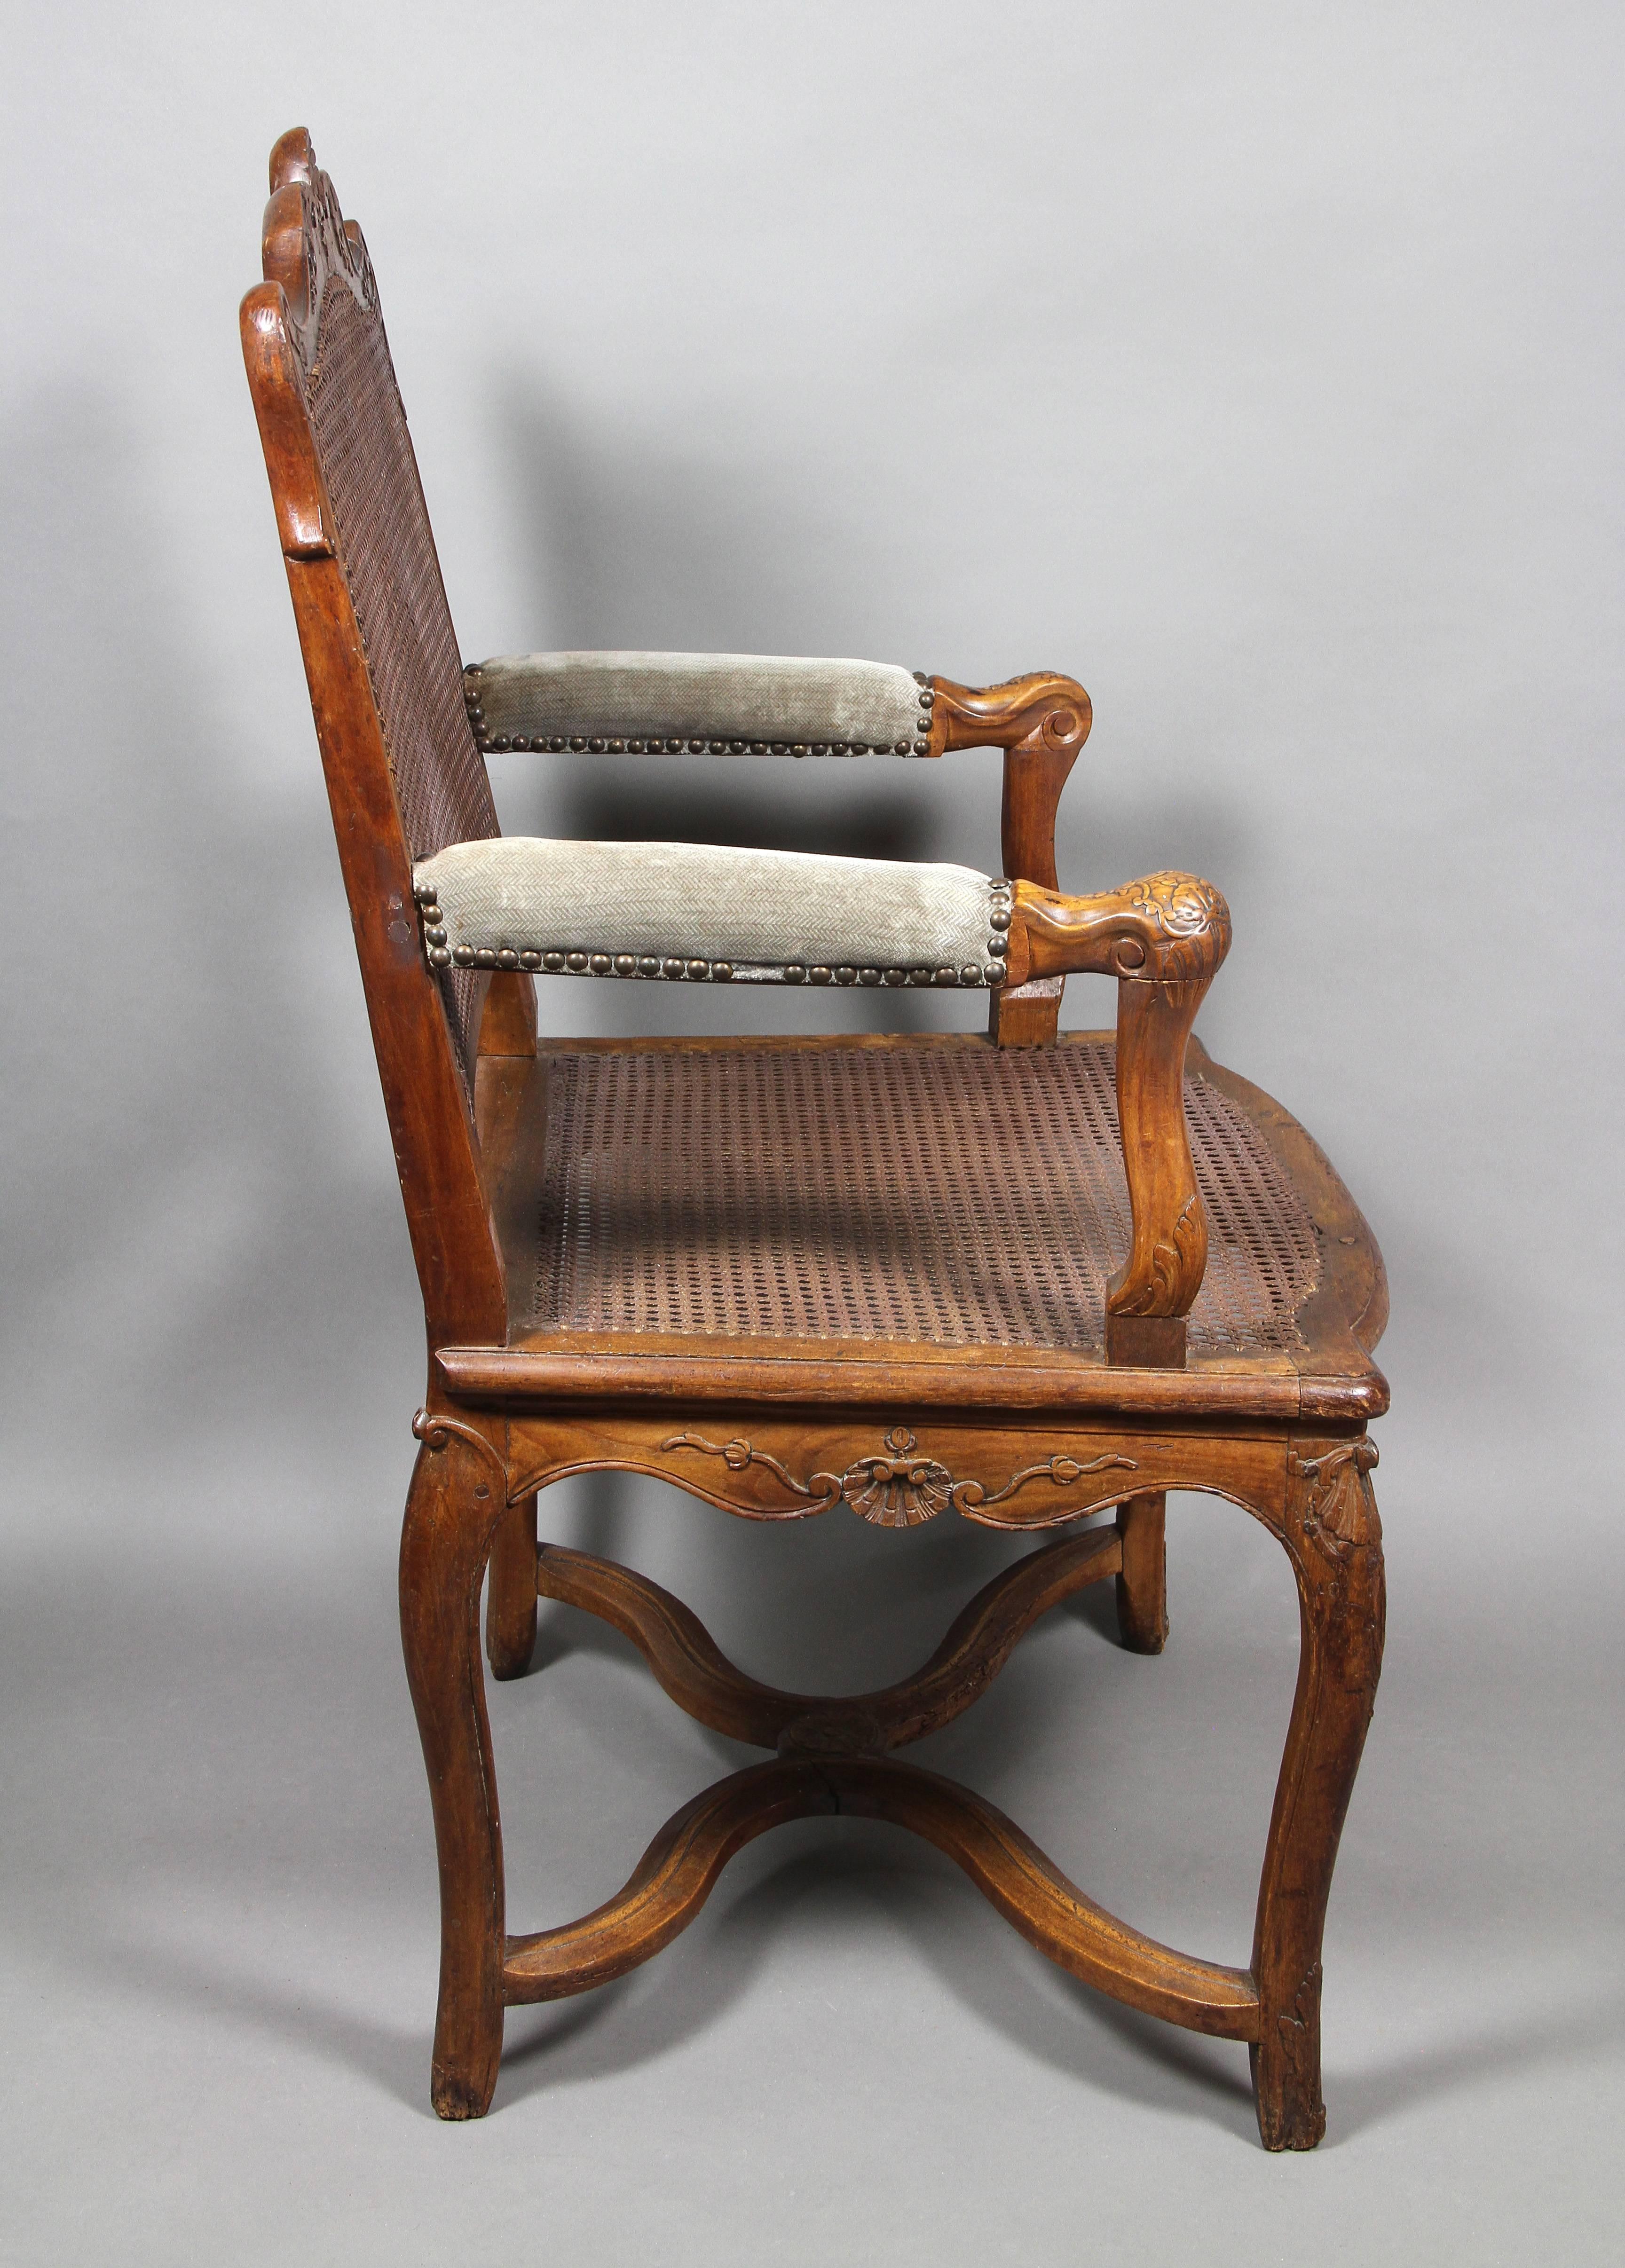 Regence Walnut and Caned Fauteuil/ Armchair In Good Condition For Sale In Essex, MA